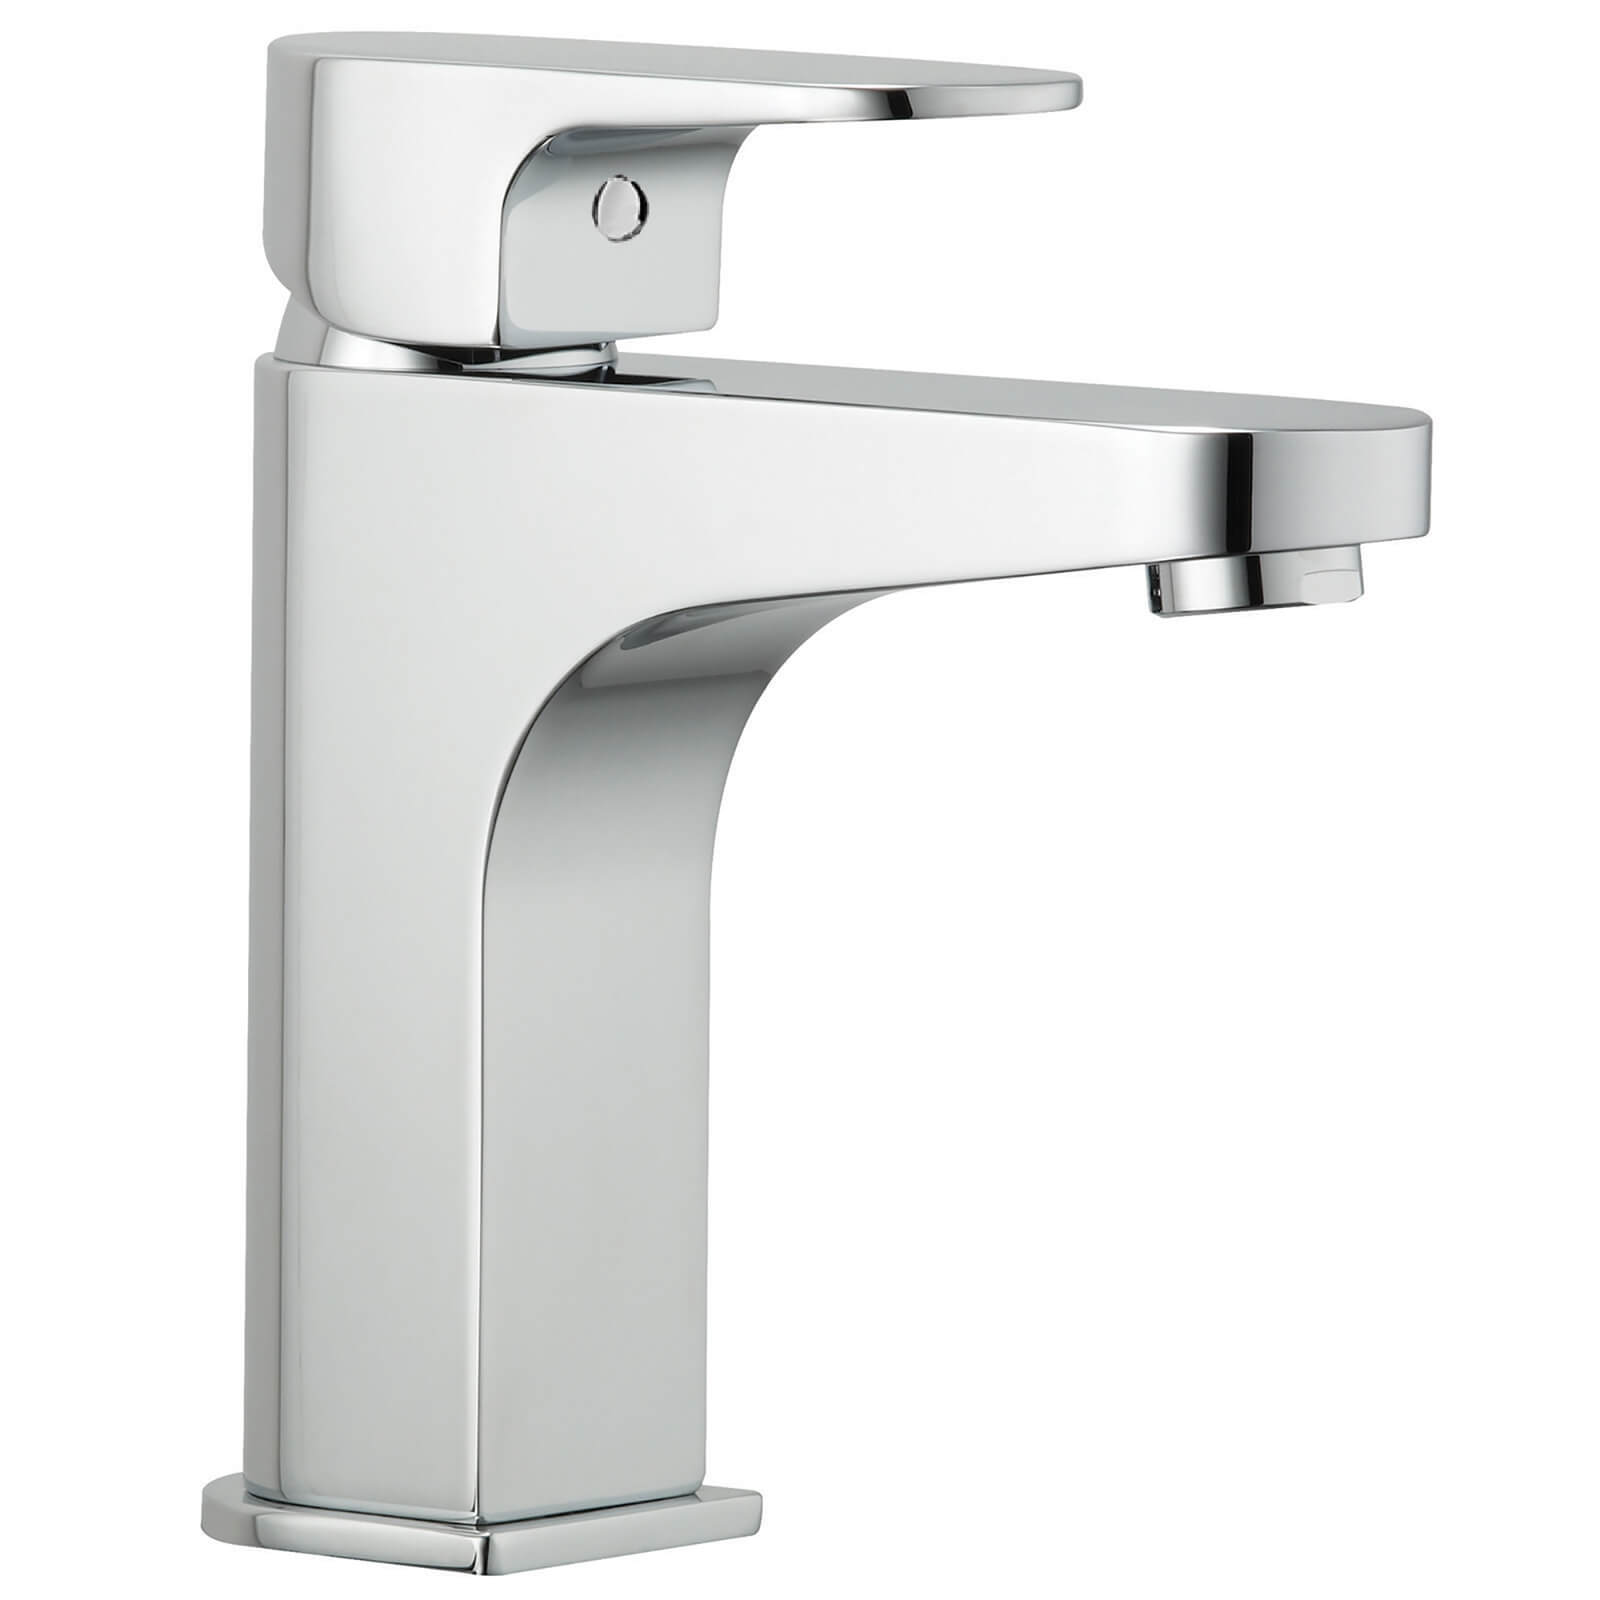 Albany Mono Basin Tap with Waste - Chrome